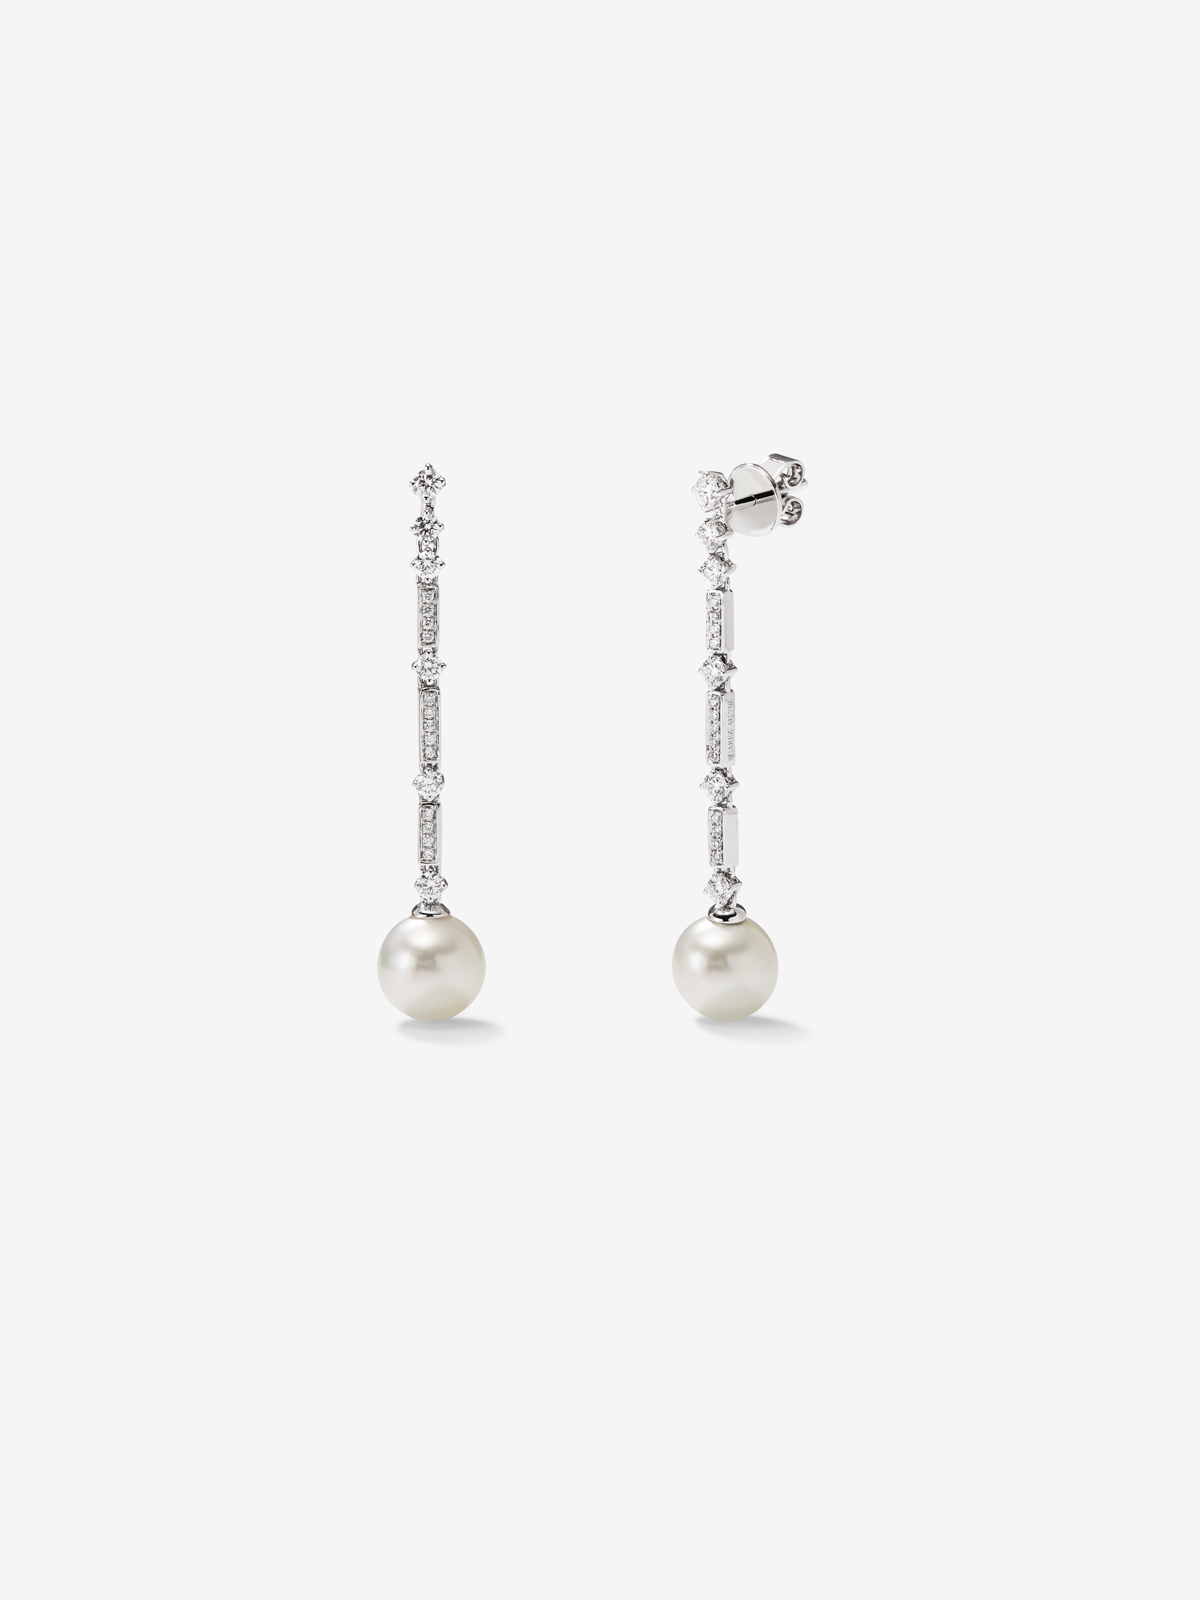 18K white gold earrings with white pearls and white diamonds in a bright size of 0.66